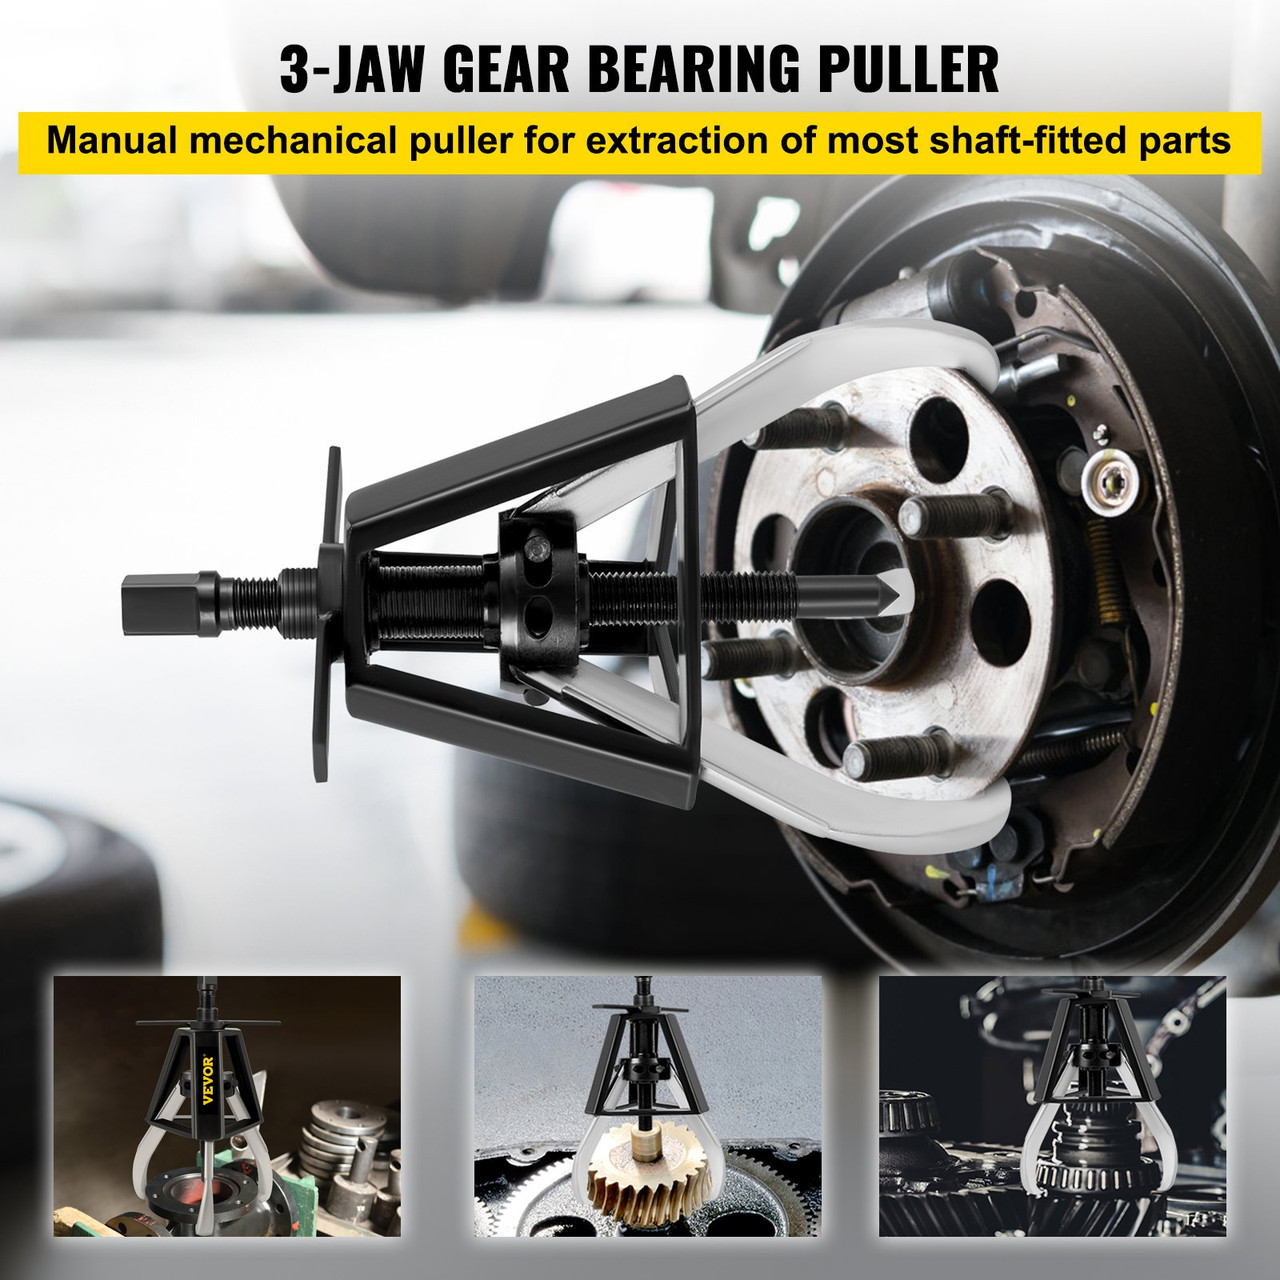 3 Gear Jaw Puller, 2 Ton/4408 LBS Capacity Manual Puller,13" - 21.6" Spread Reach and 3.9" - 7.9" Spread Range, 11" Lead Screw Length Gear Removal Tools For Slide Gears, Pulleys, and Flywheels